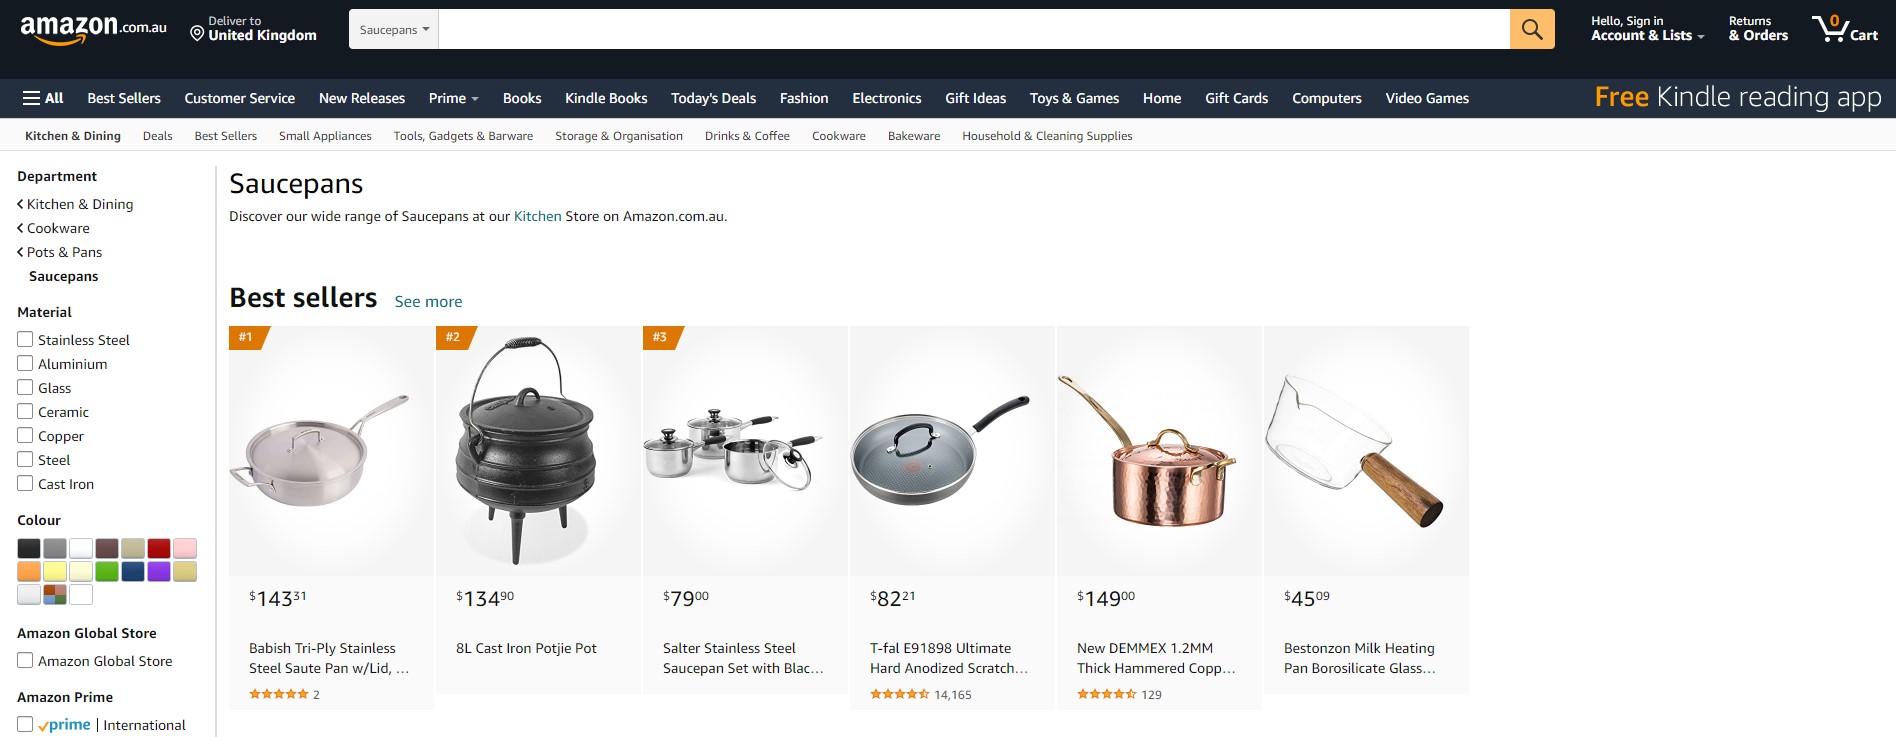 Example of e-commerce product pages